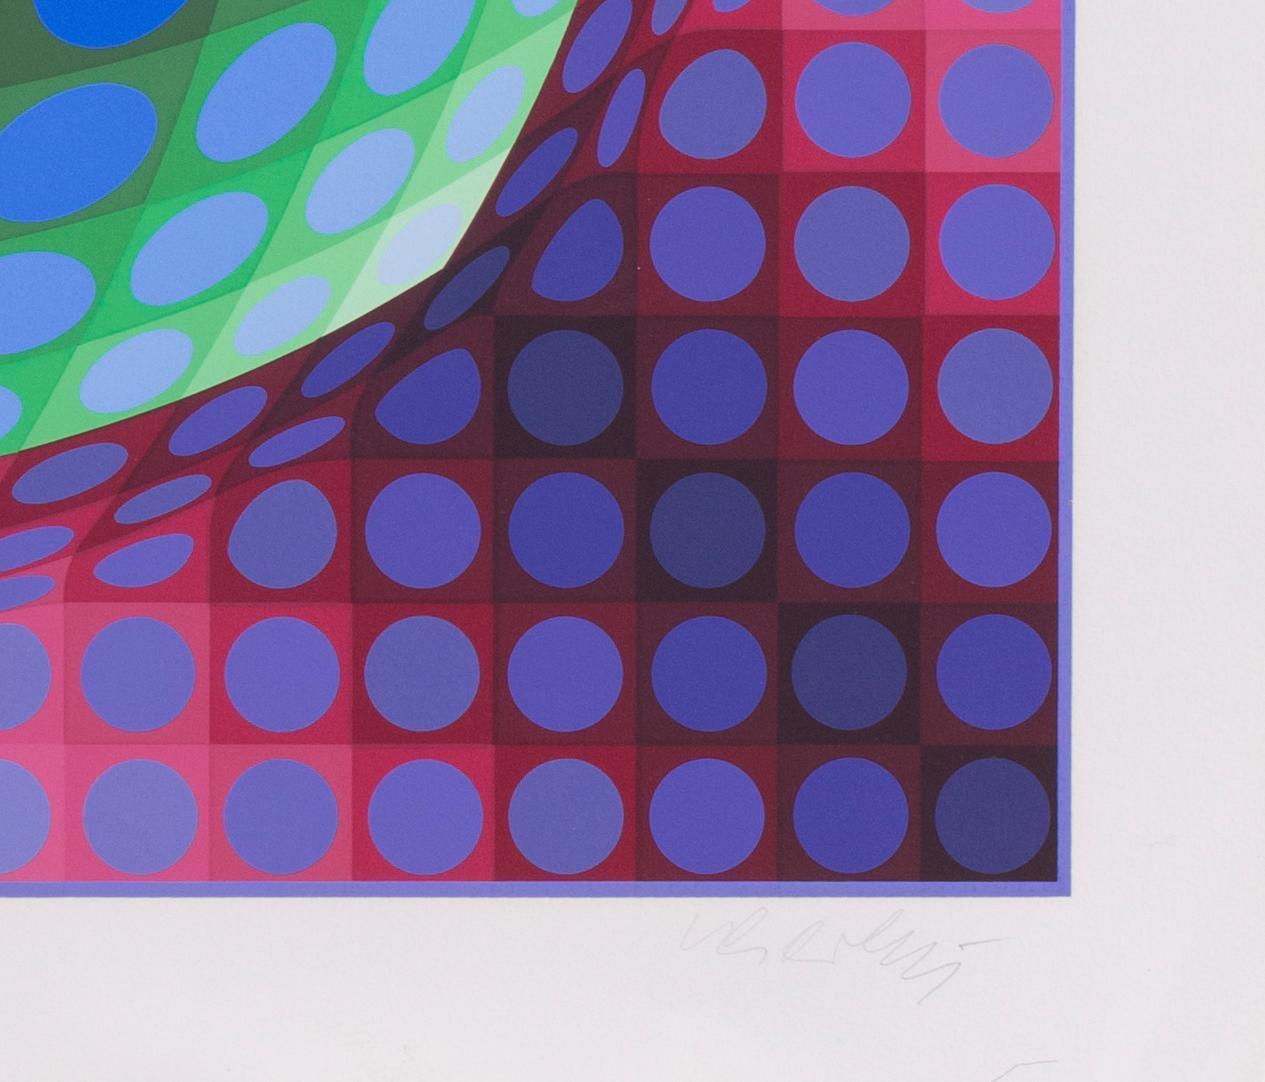 Victor Vasarely (Hungarian / French 1906 – 1997)
Syry, 1978
Numbered ‘54/250’ and signed ‘Vasarely’ (lower right)
Screen print
29.1/2 x 29.1/2 in. (75 x 75 cm.) Including margin

One central circular form with green and blue juxtaposed against the